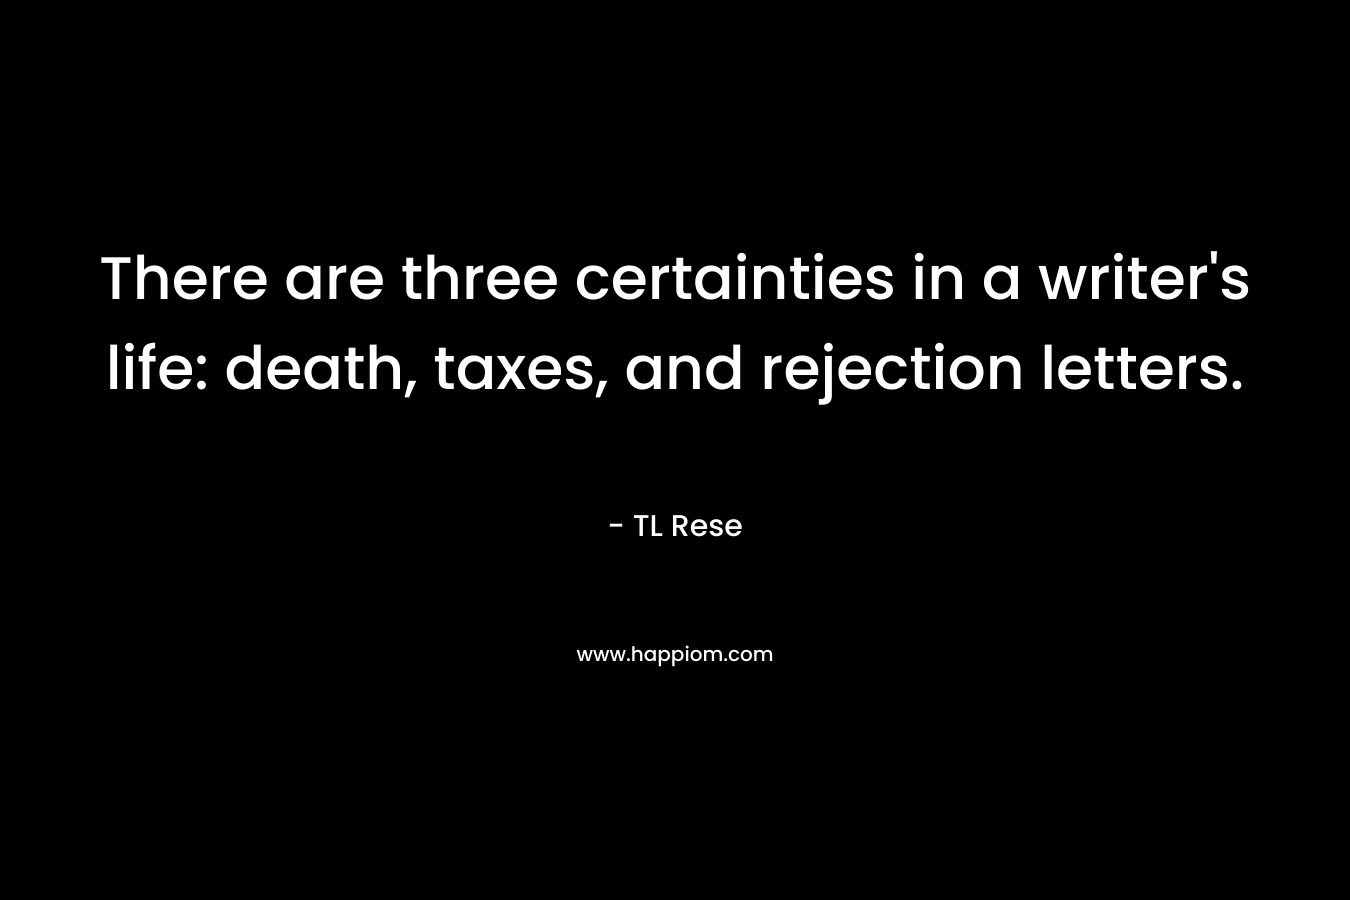 There are three certainties in a writer’s life: death, taxes, and rejection letters. – TL Rese